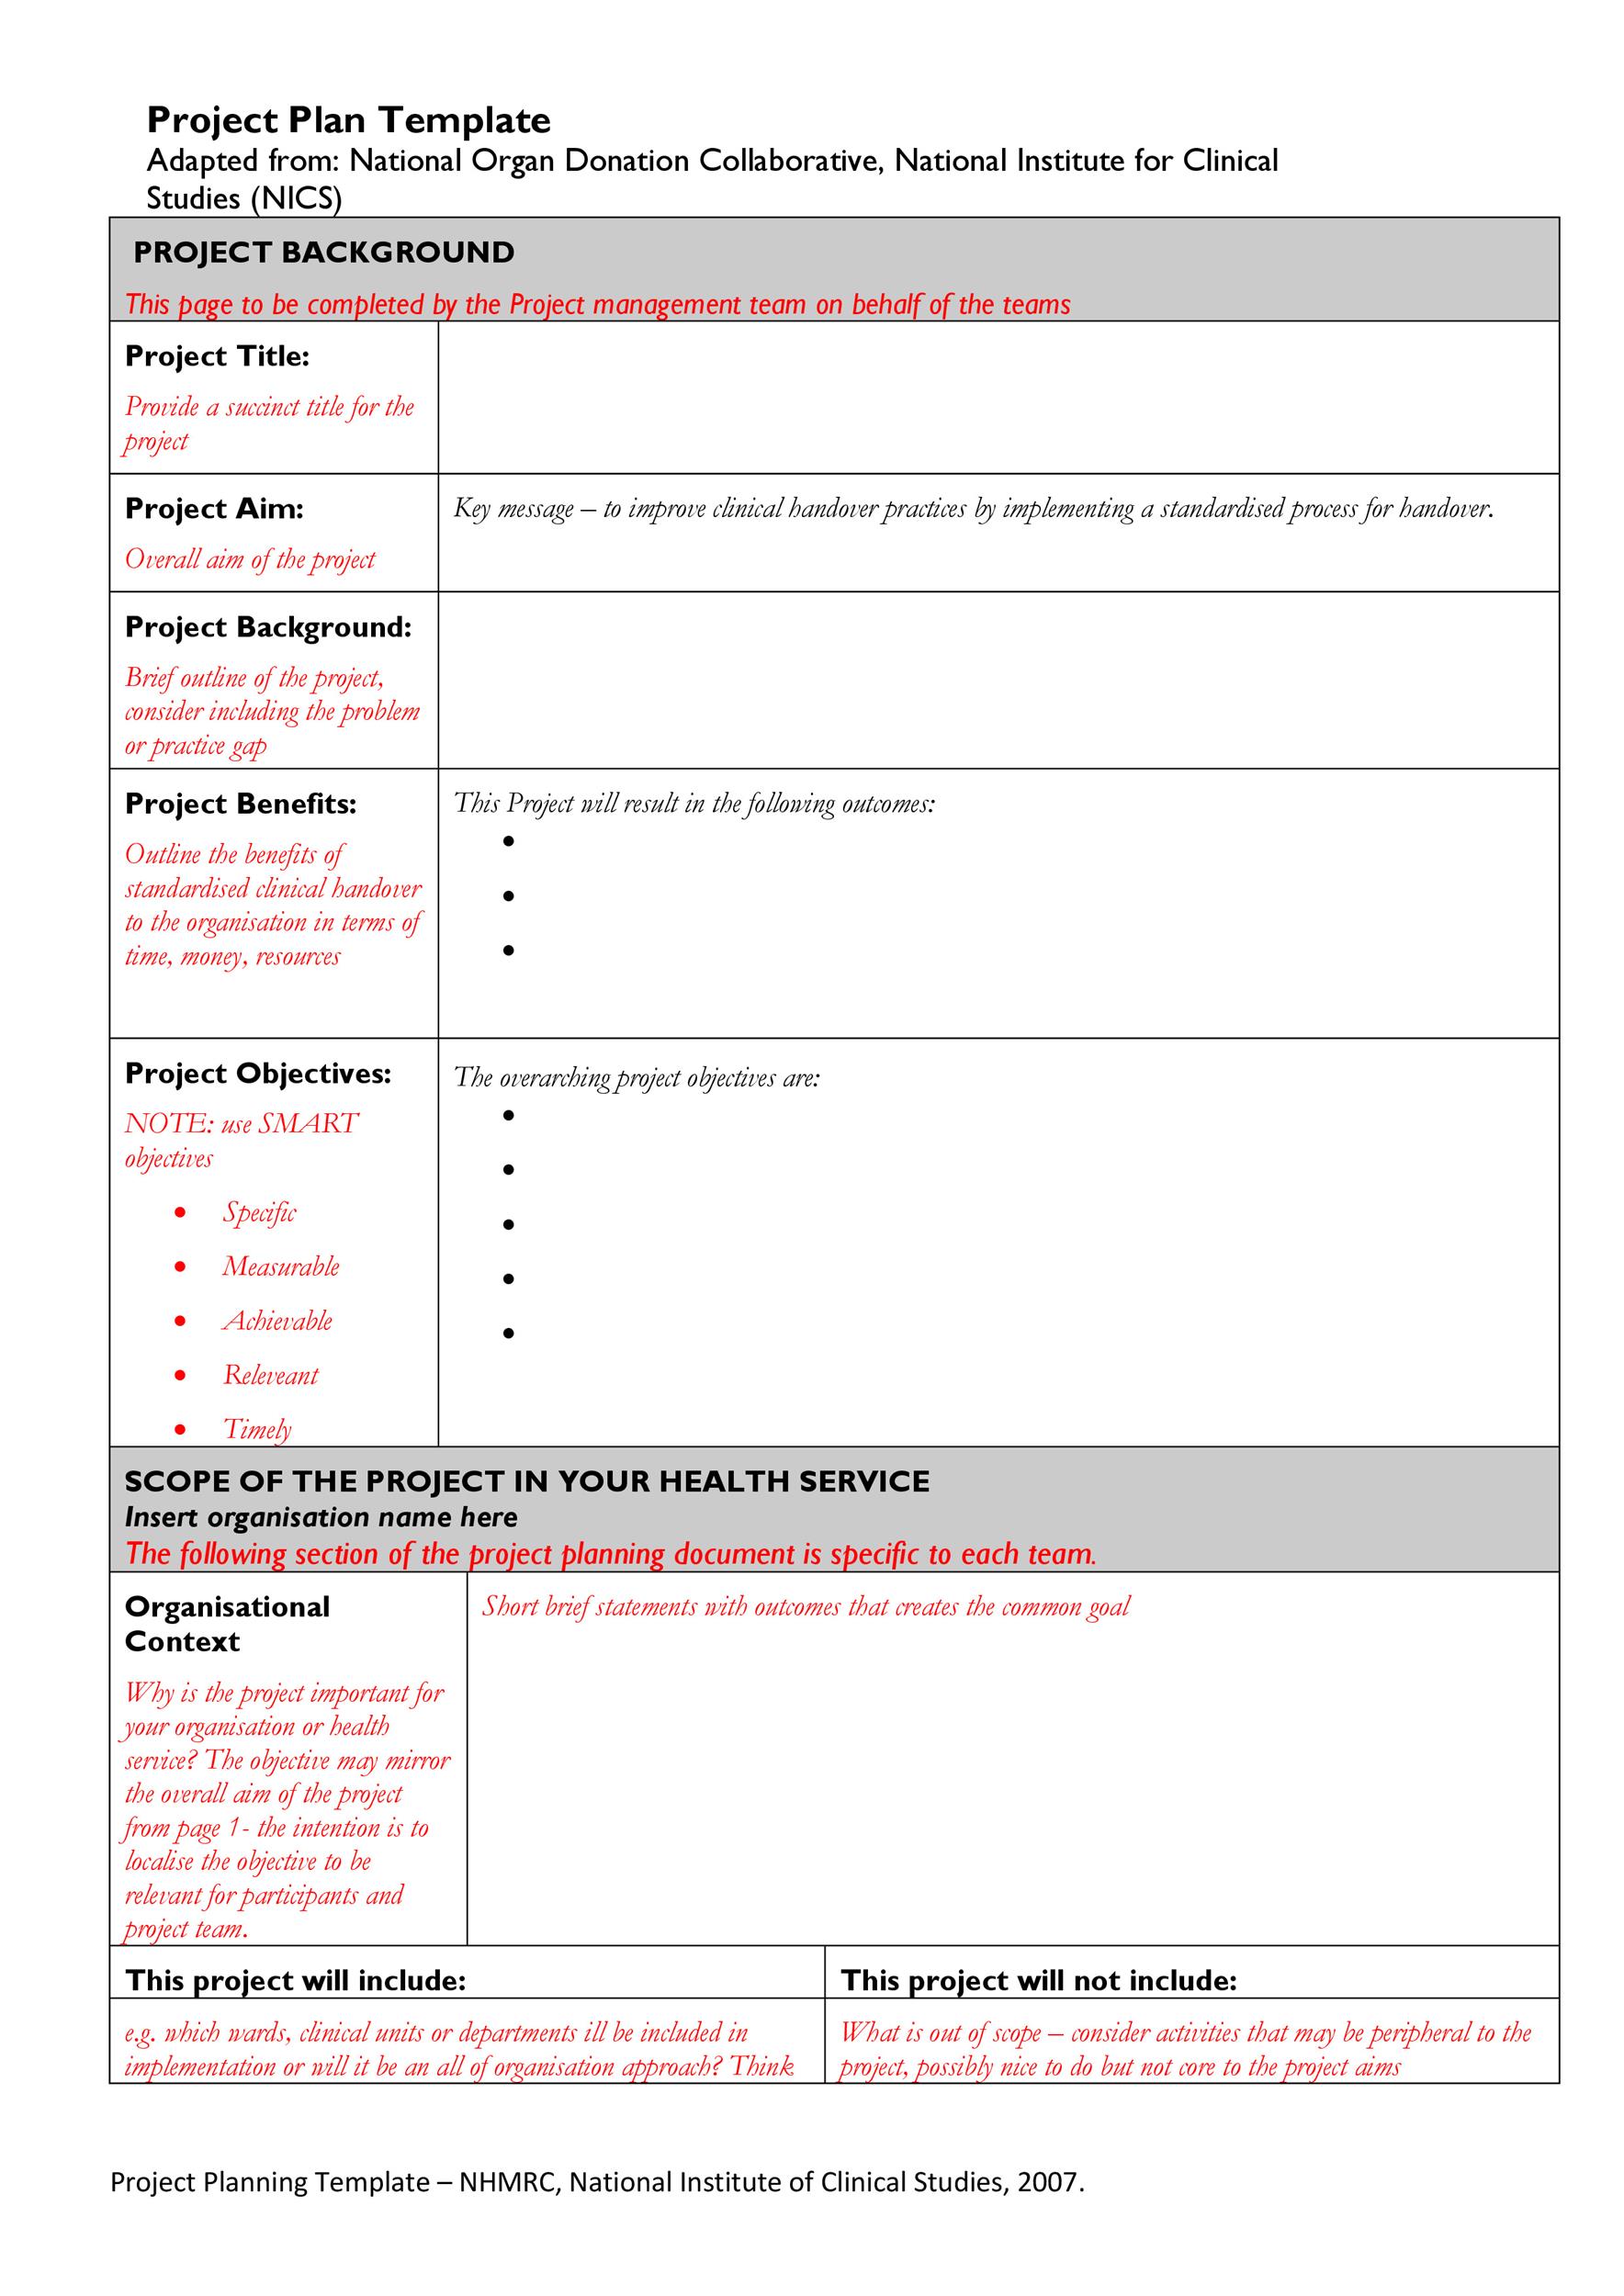 rd-project-plan-template-tutore-org-master-of-documents